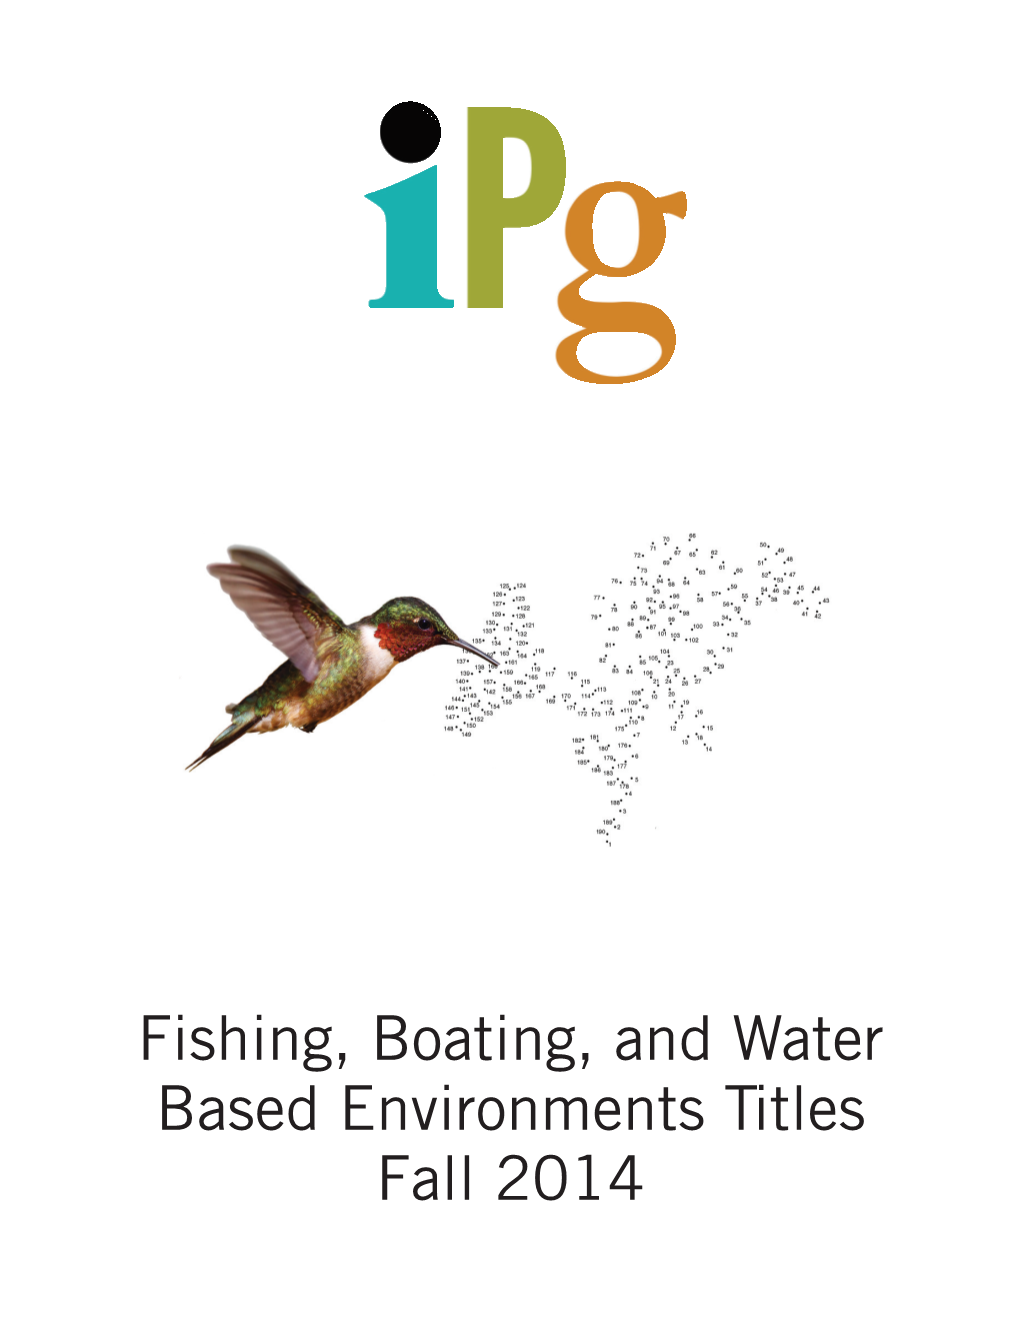 Fall 2014 Outdoor-Fishing, Boating, and Water Based Environment